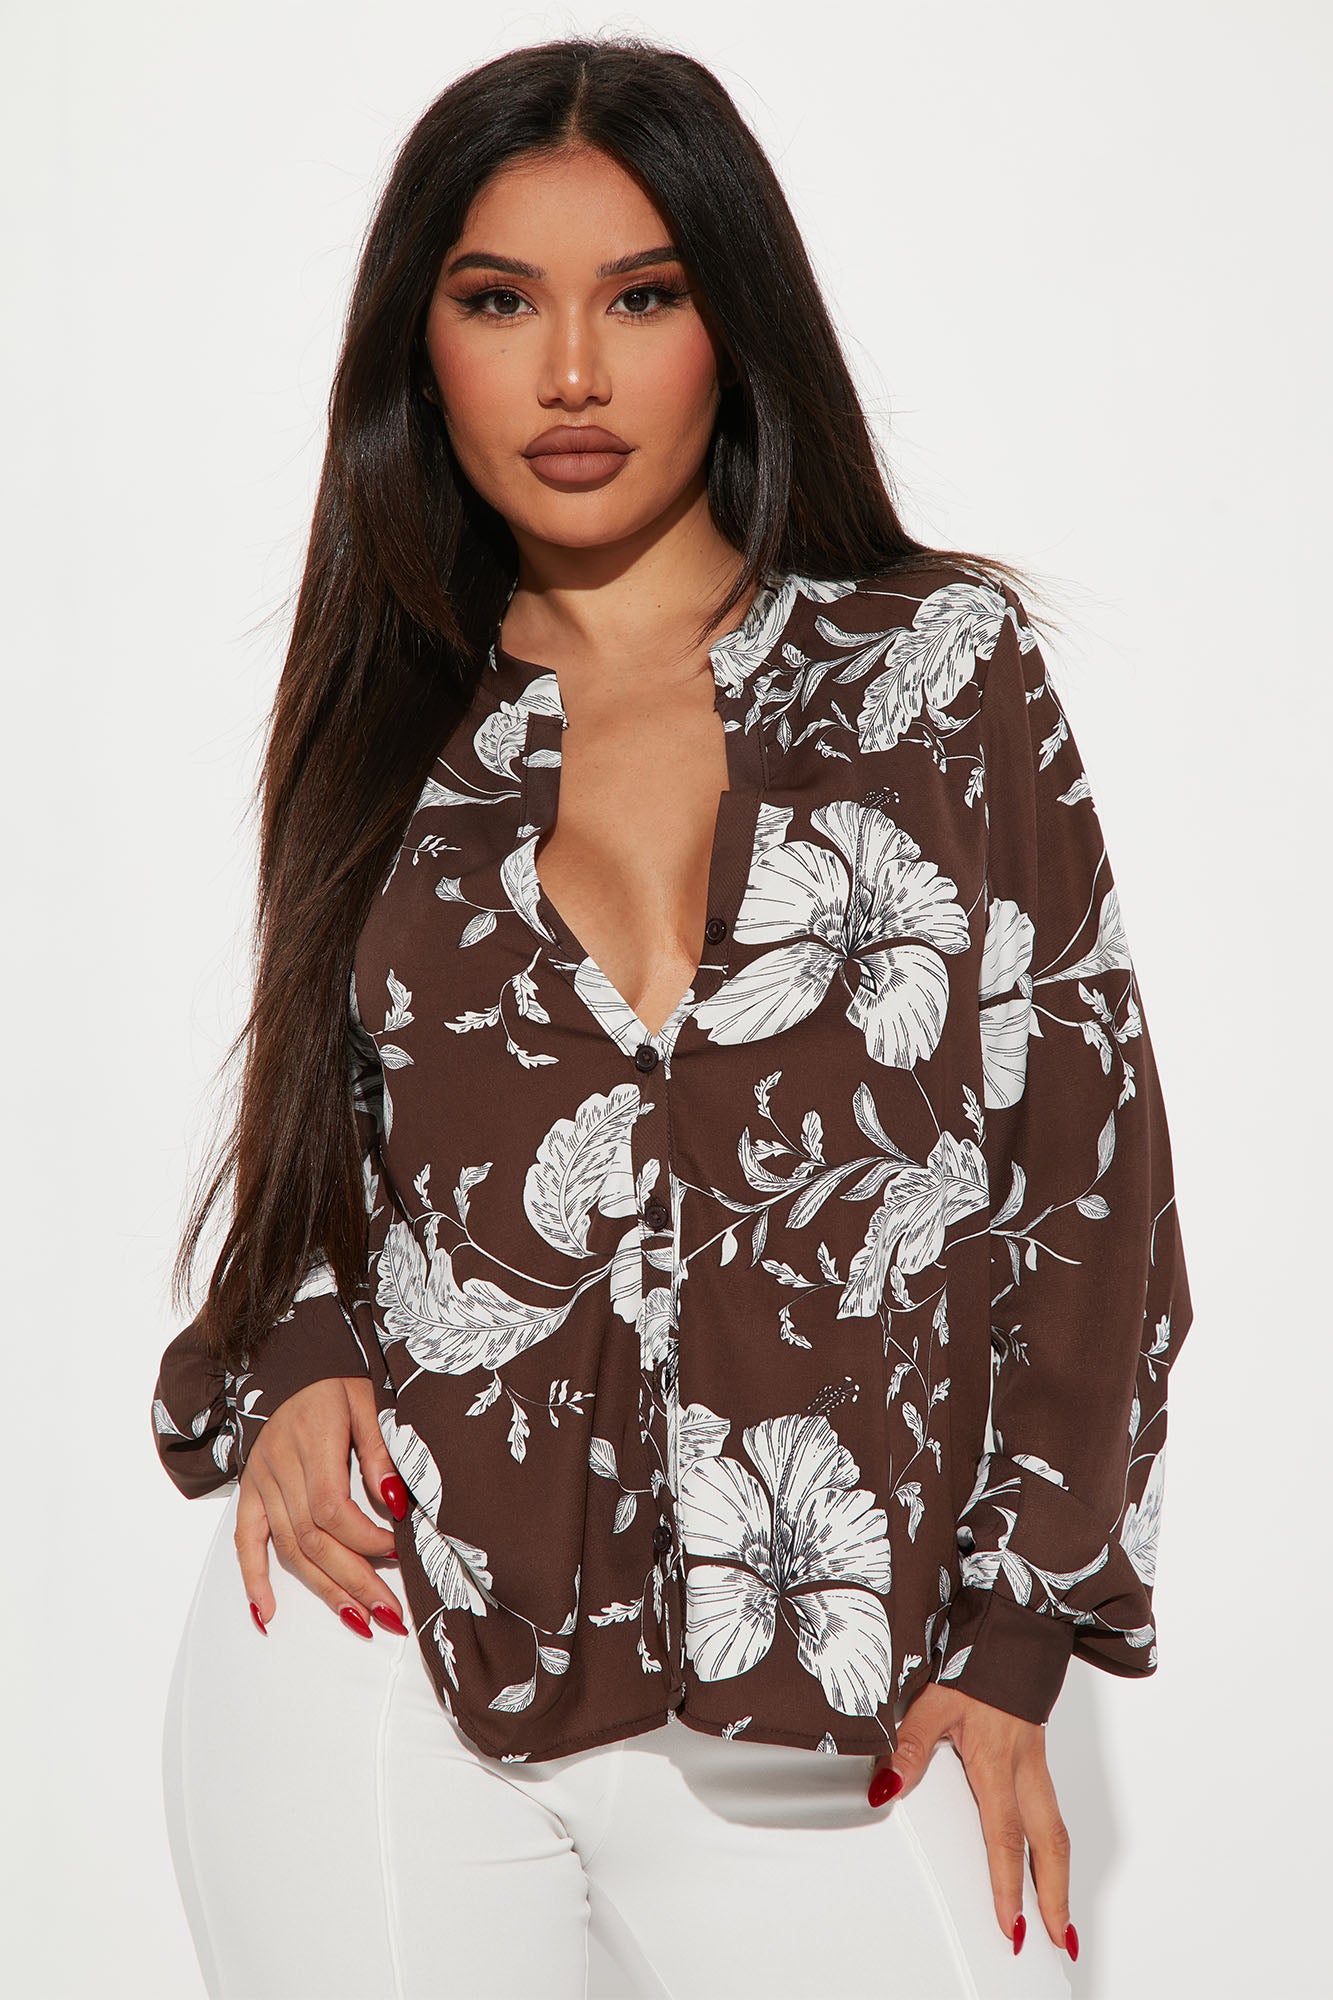 Floral Emotions Top - Brown/combo